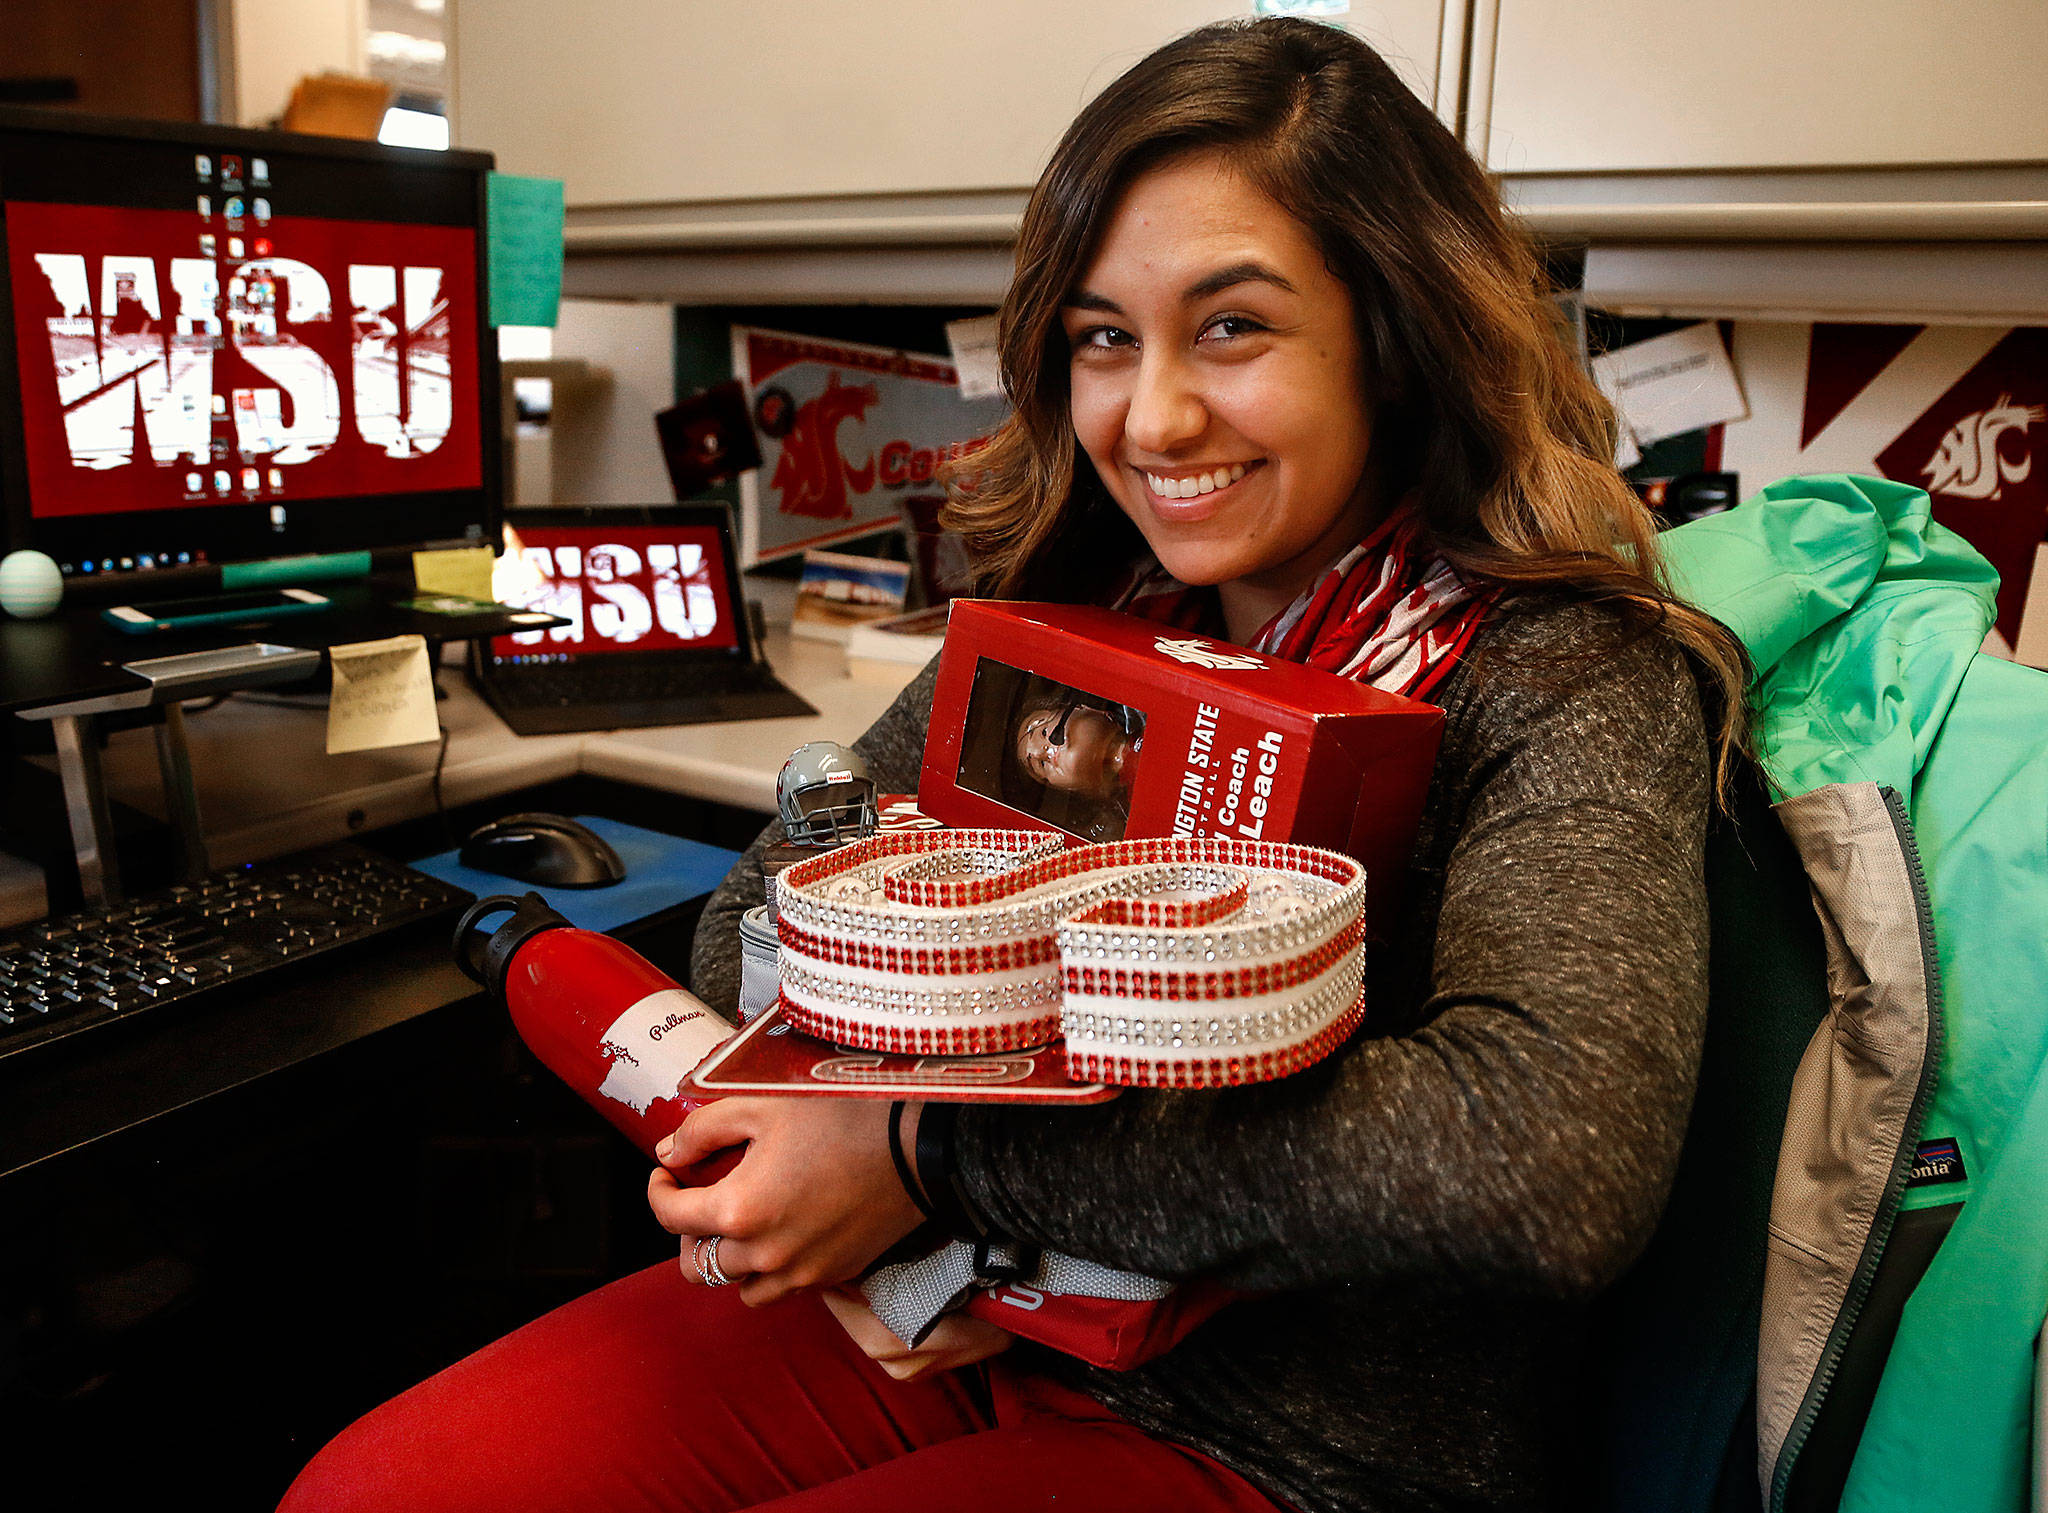 Sarah Reyes, a city of Everett communications officer, is an avid Cougar fan. Her 10th-floor city office space is pretty much tricked out in Cougar colors. (Dan Bates / The Herald)